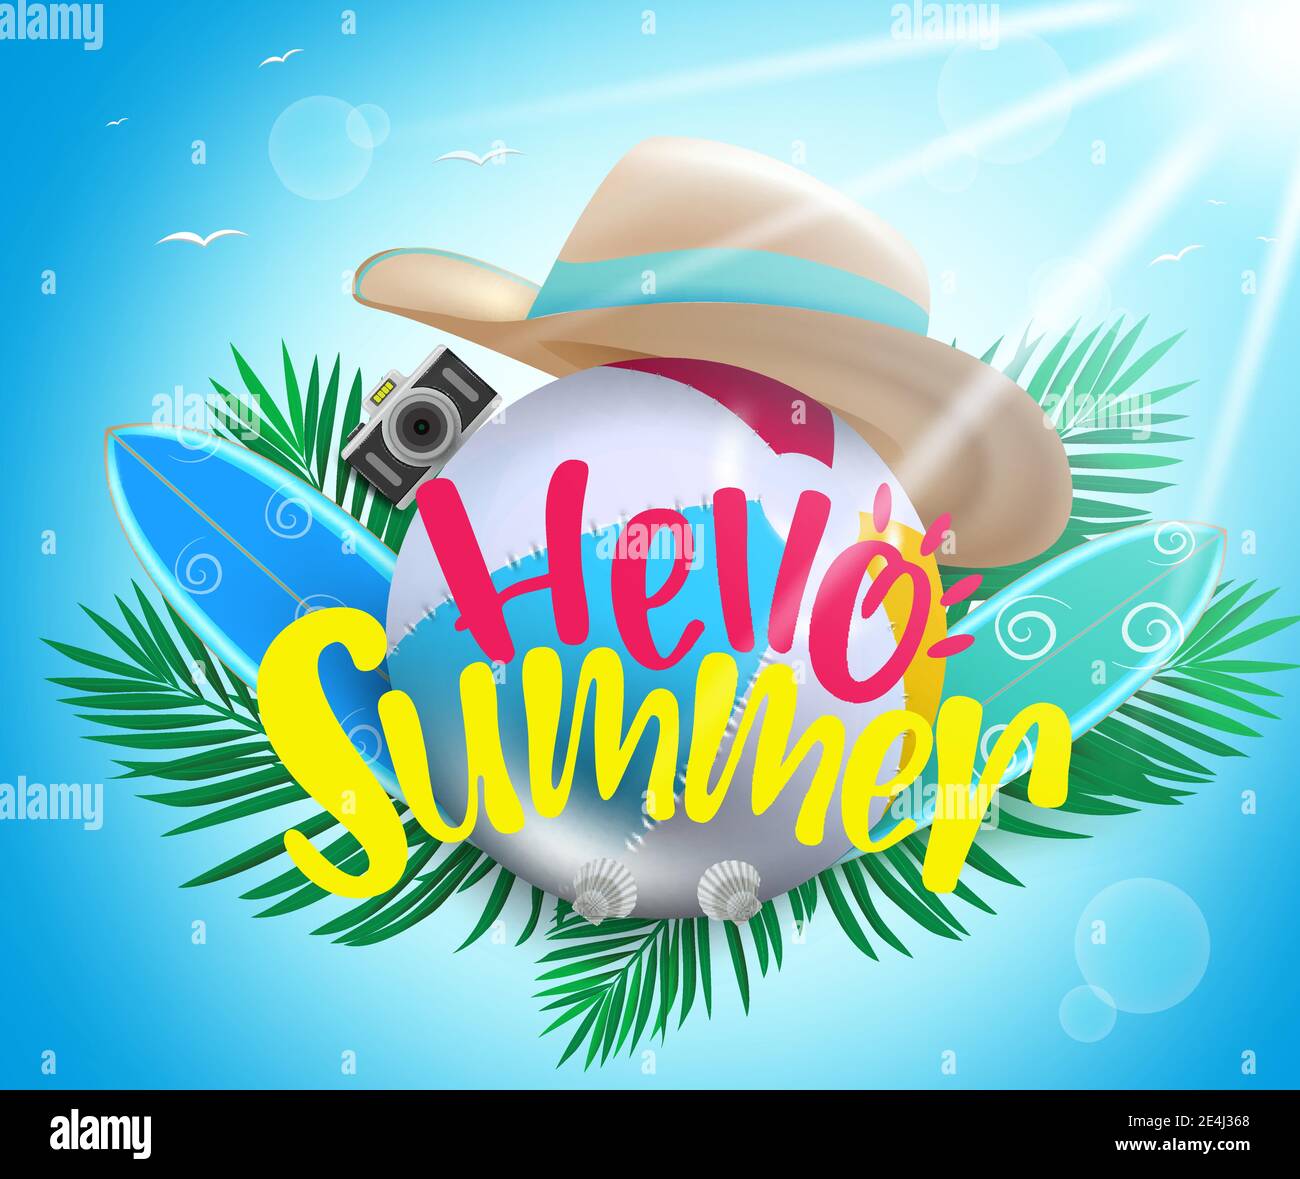 Summer vector background concept. Hello summer text with beach ball, hat, surfboard and camera elements for fun and relax travel vacation design. Stock Vector